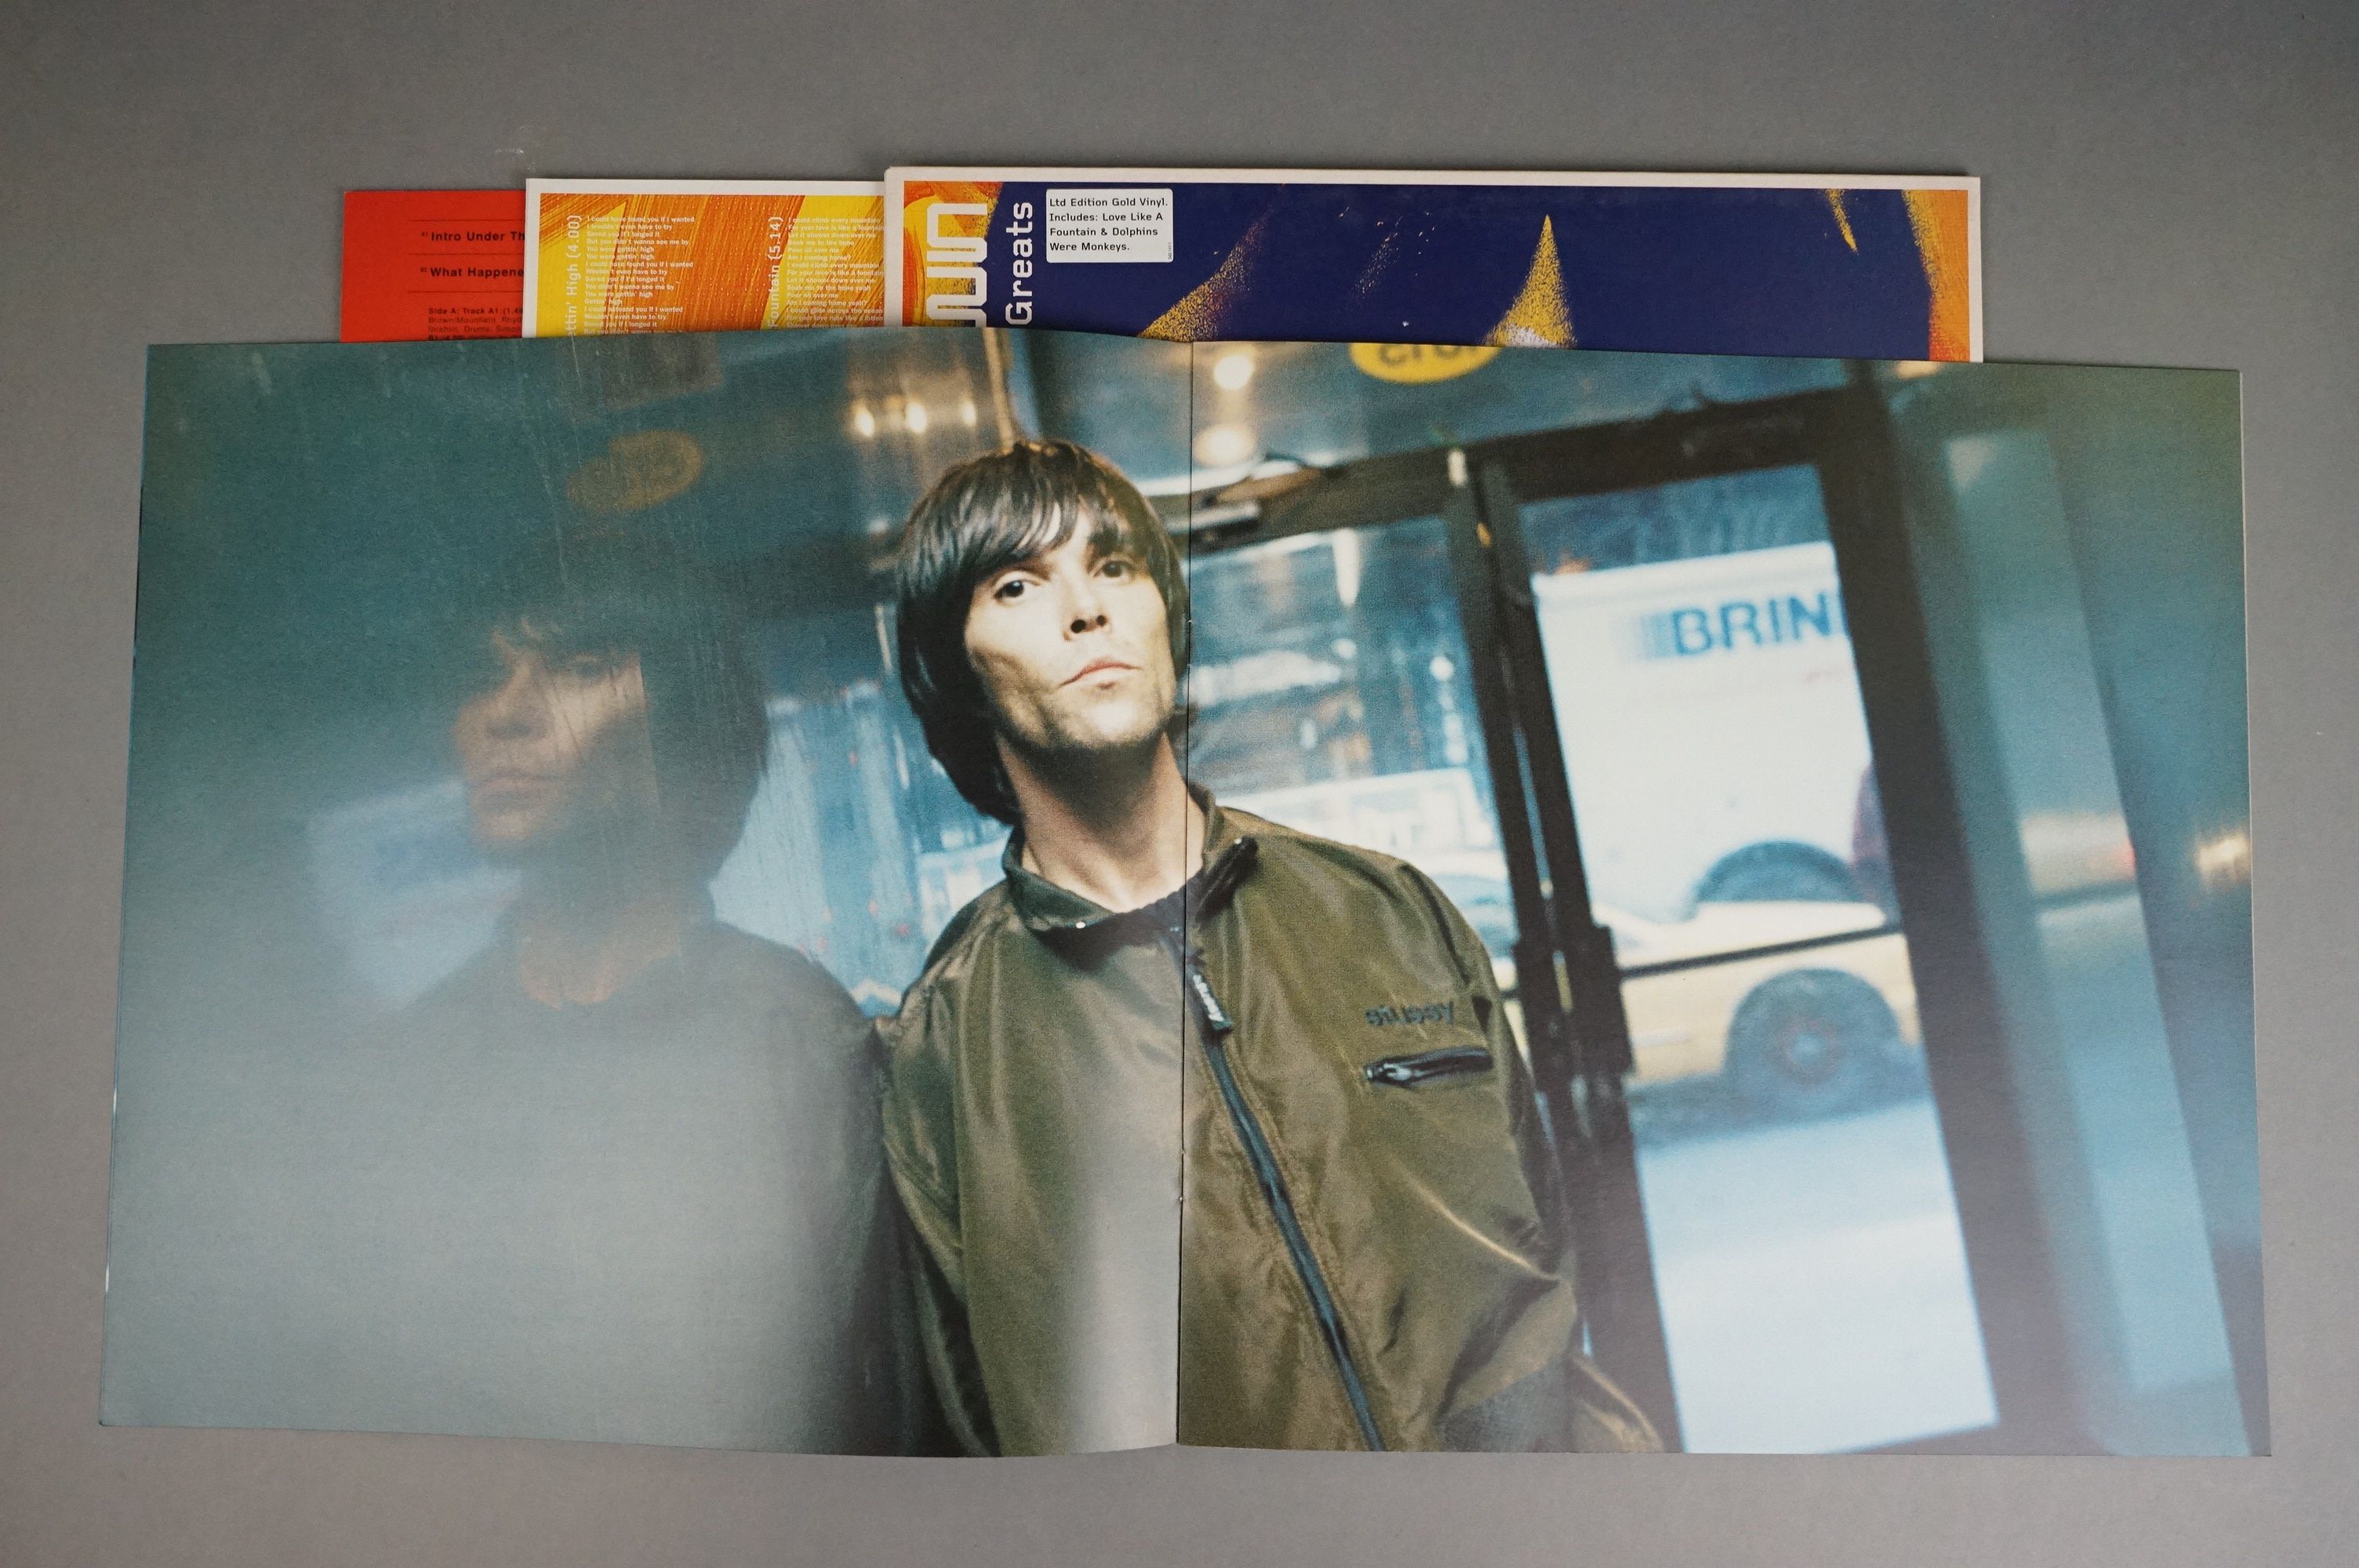 Vinyl - Two Ian Brown LPs on Polydor to include Unfinished Monkey Business 539916-1 ltd edn gatefold - Image 4 of 12